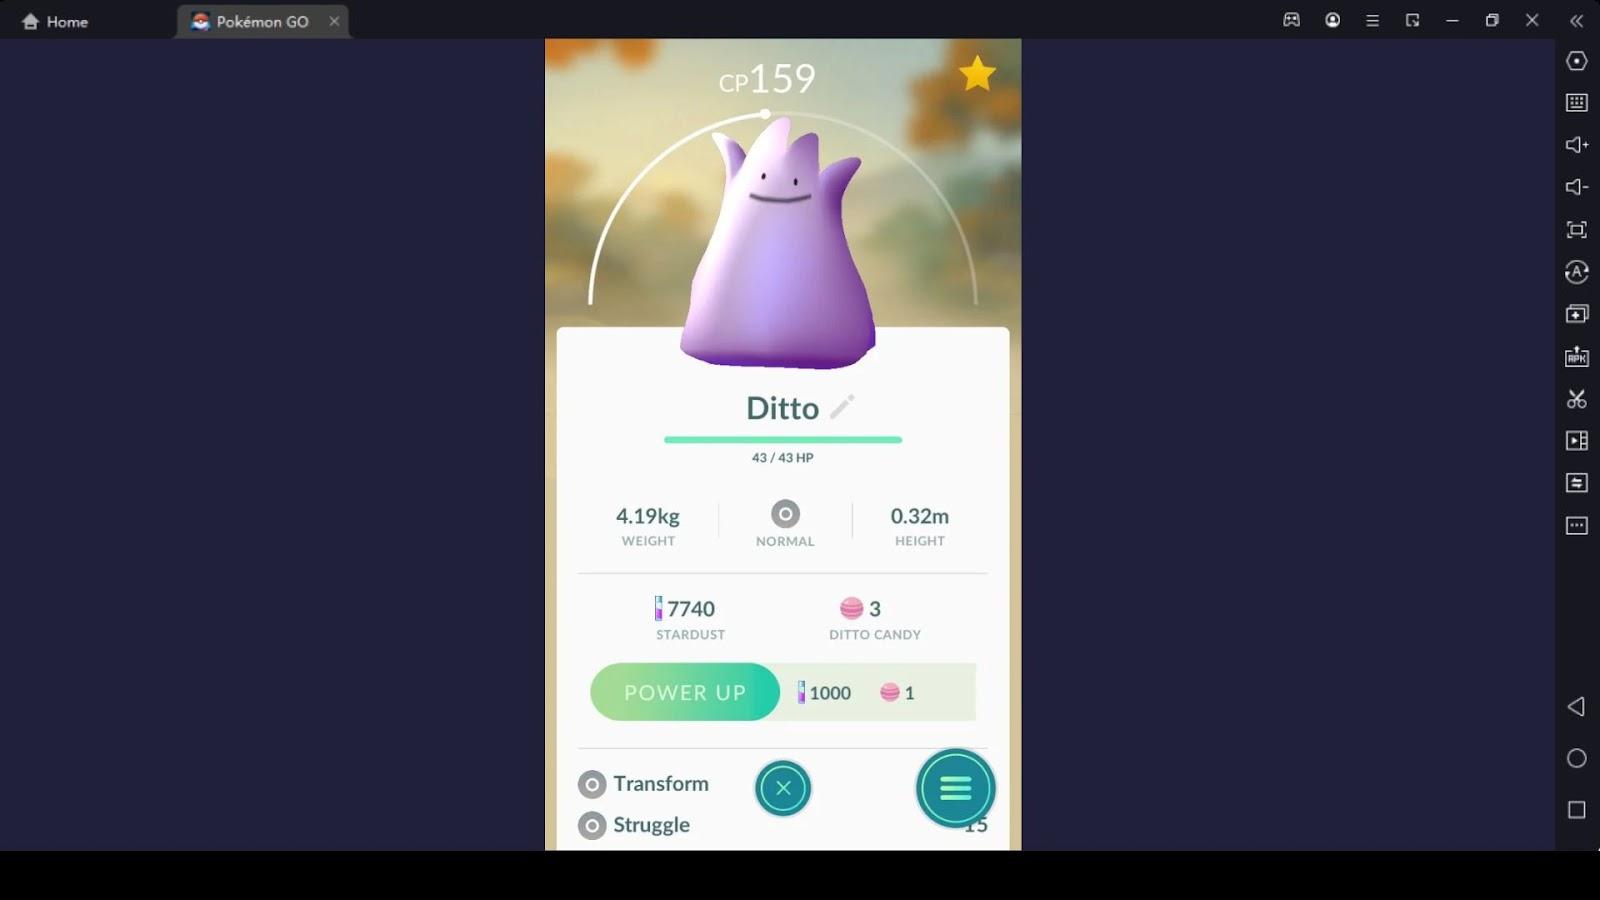 Overview of the Pokémon Go Ditto